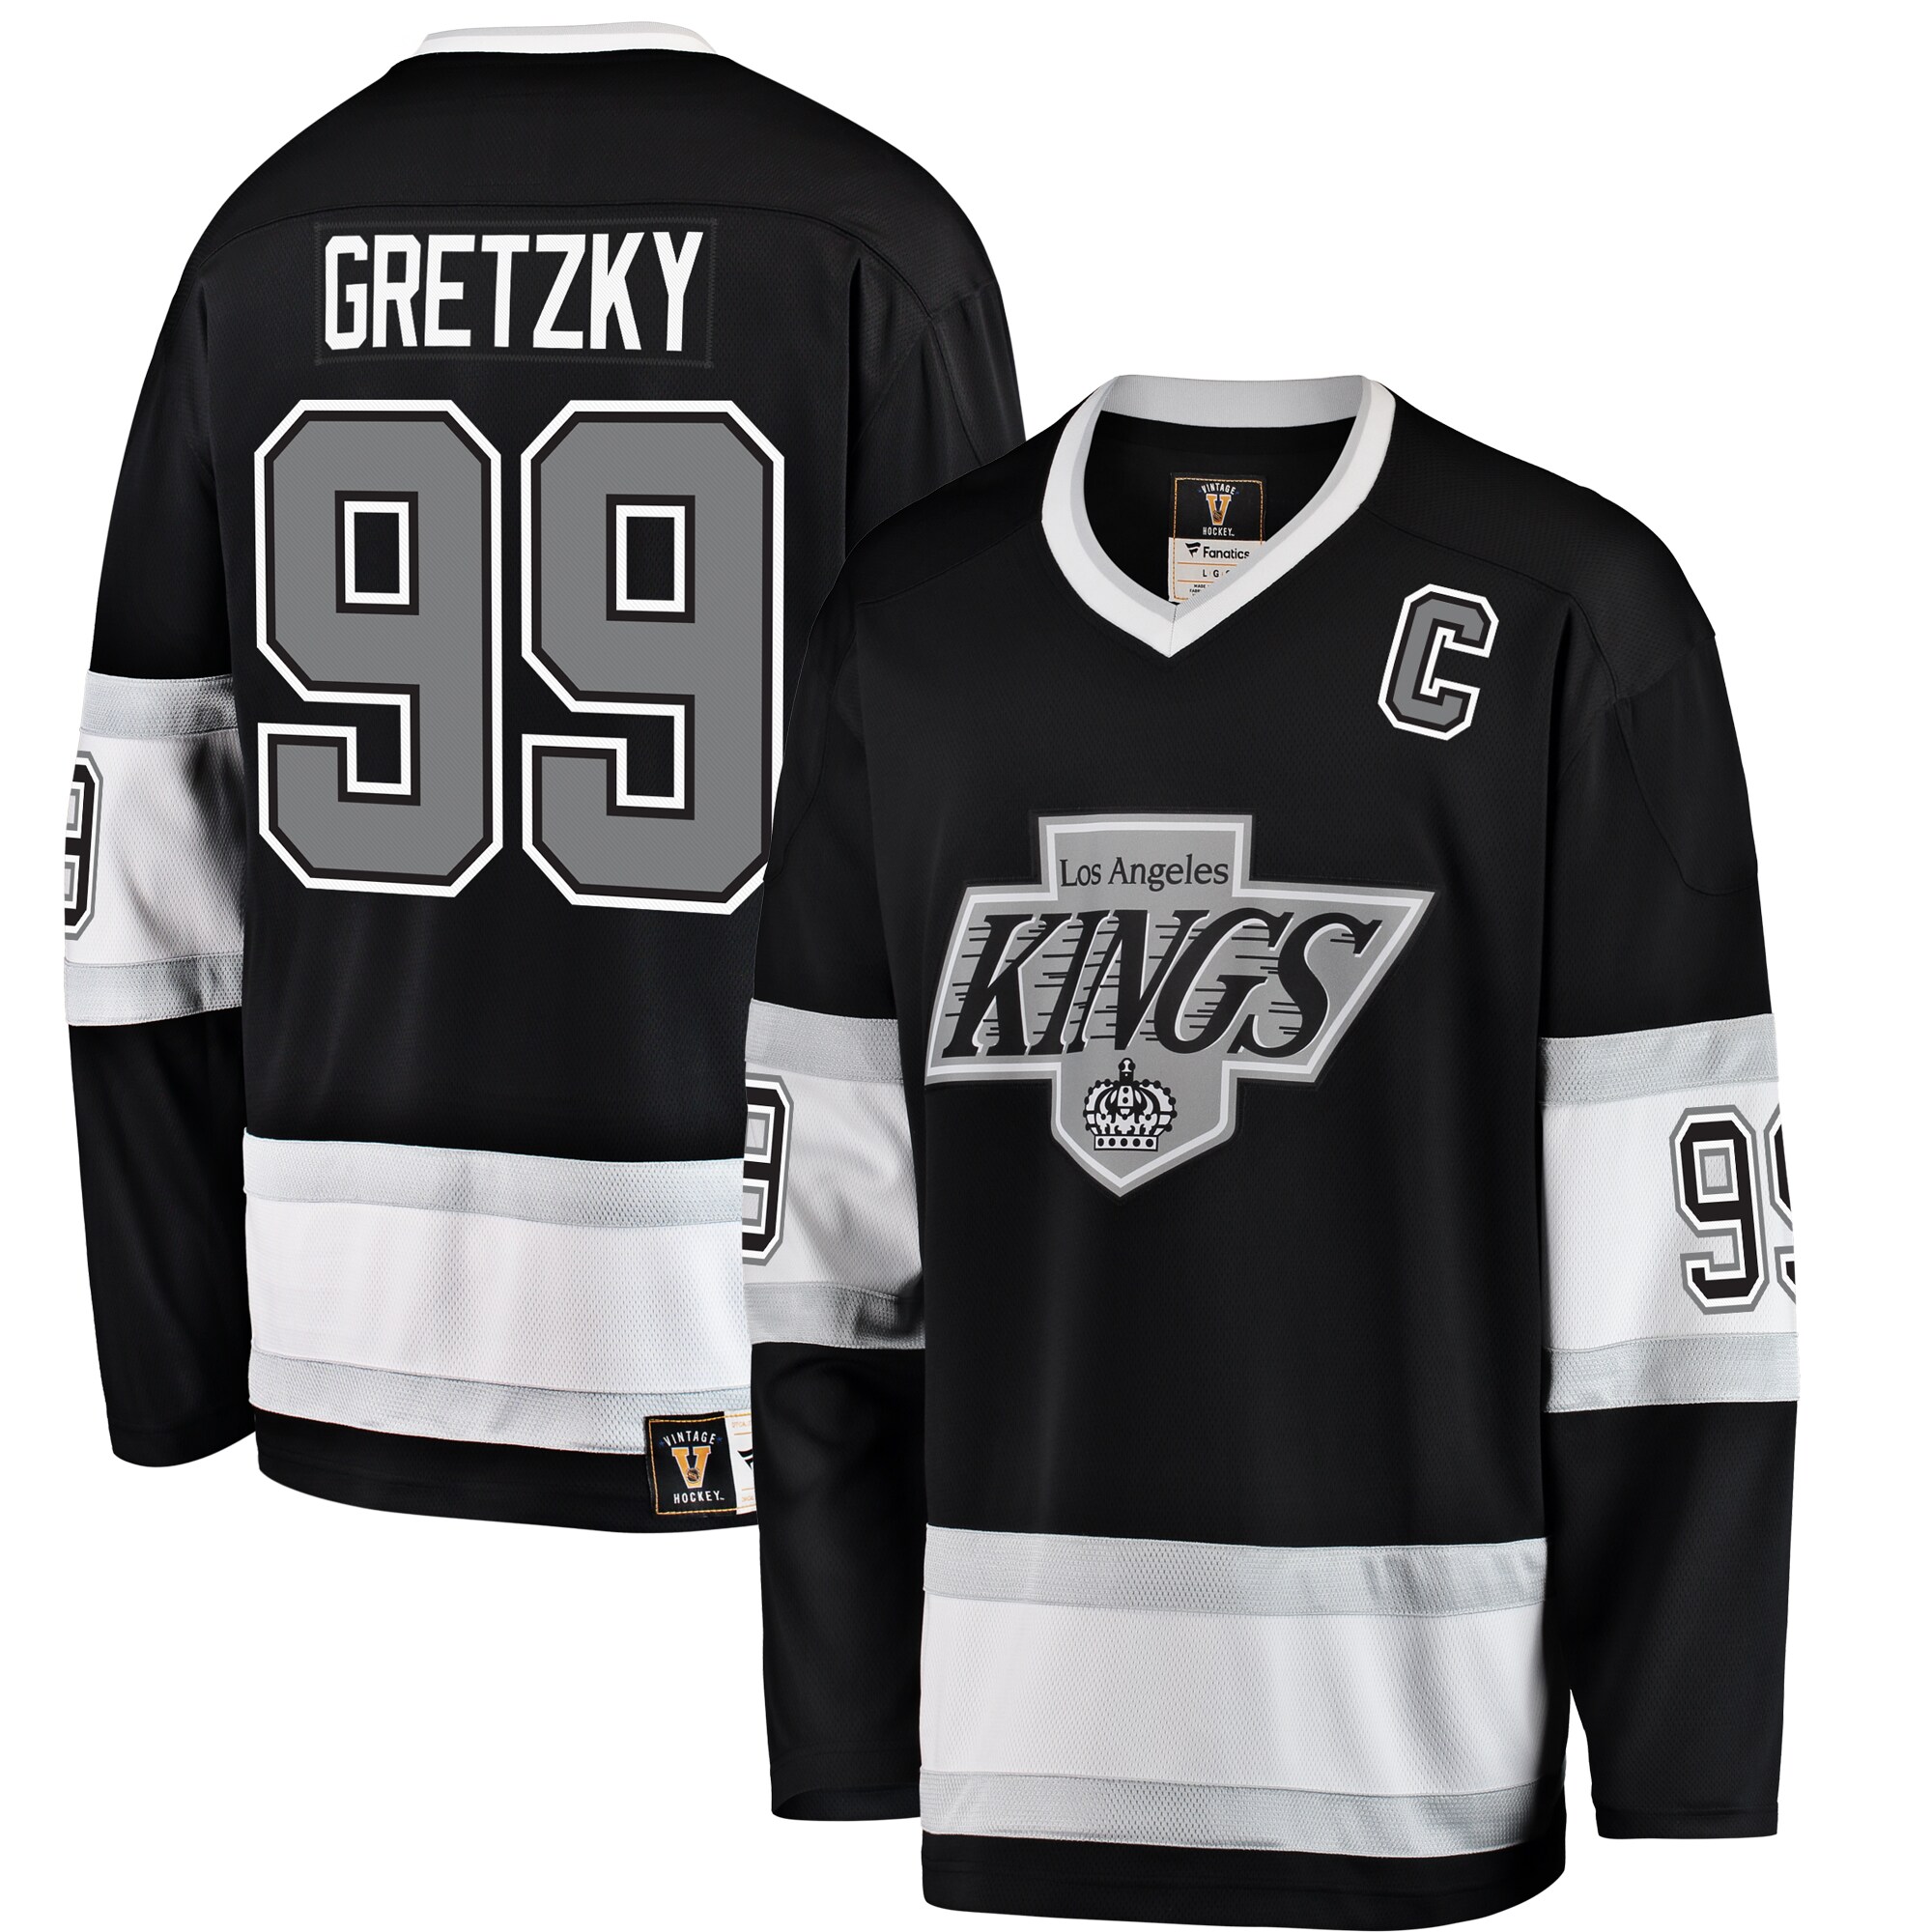 LA Kings - New items have been added to the TEAMS FOR LA Sale, including  Team-Issued LA Kings Jerseys! Shop the collection now, and raise money for  COVID-19 Relief! All LA Kings